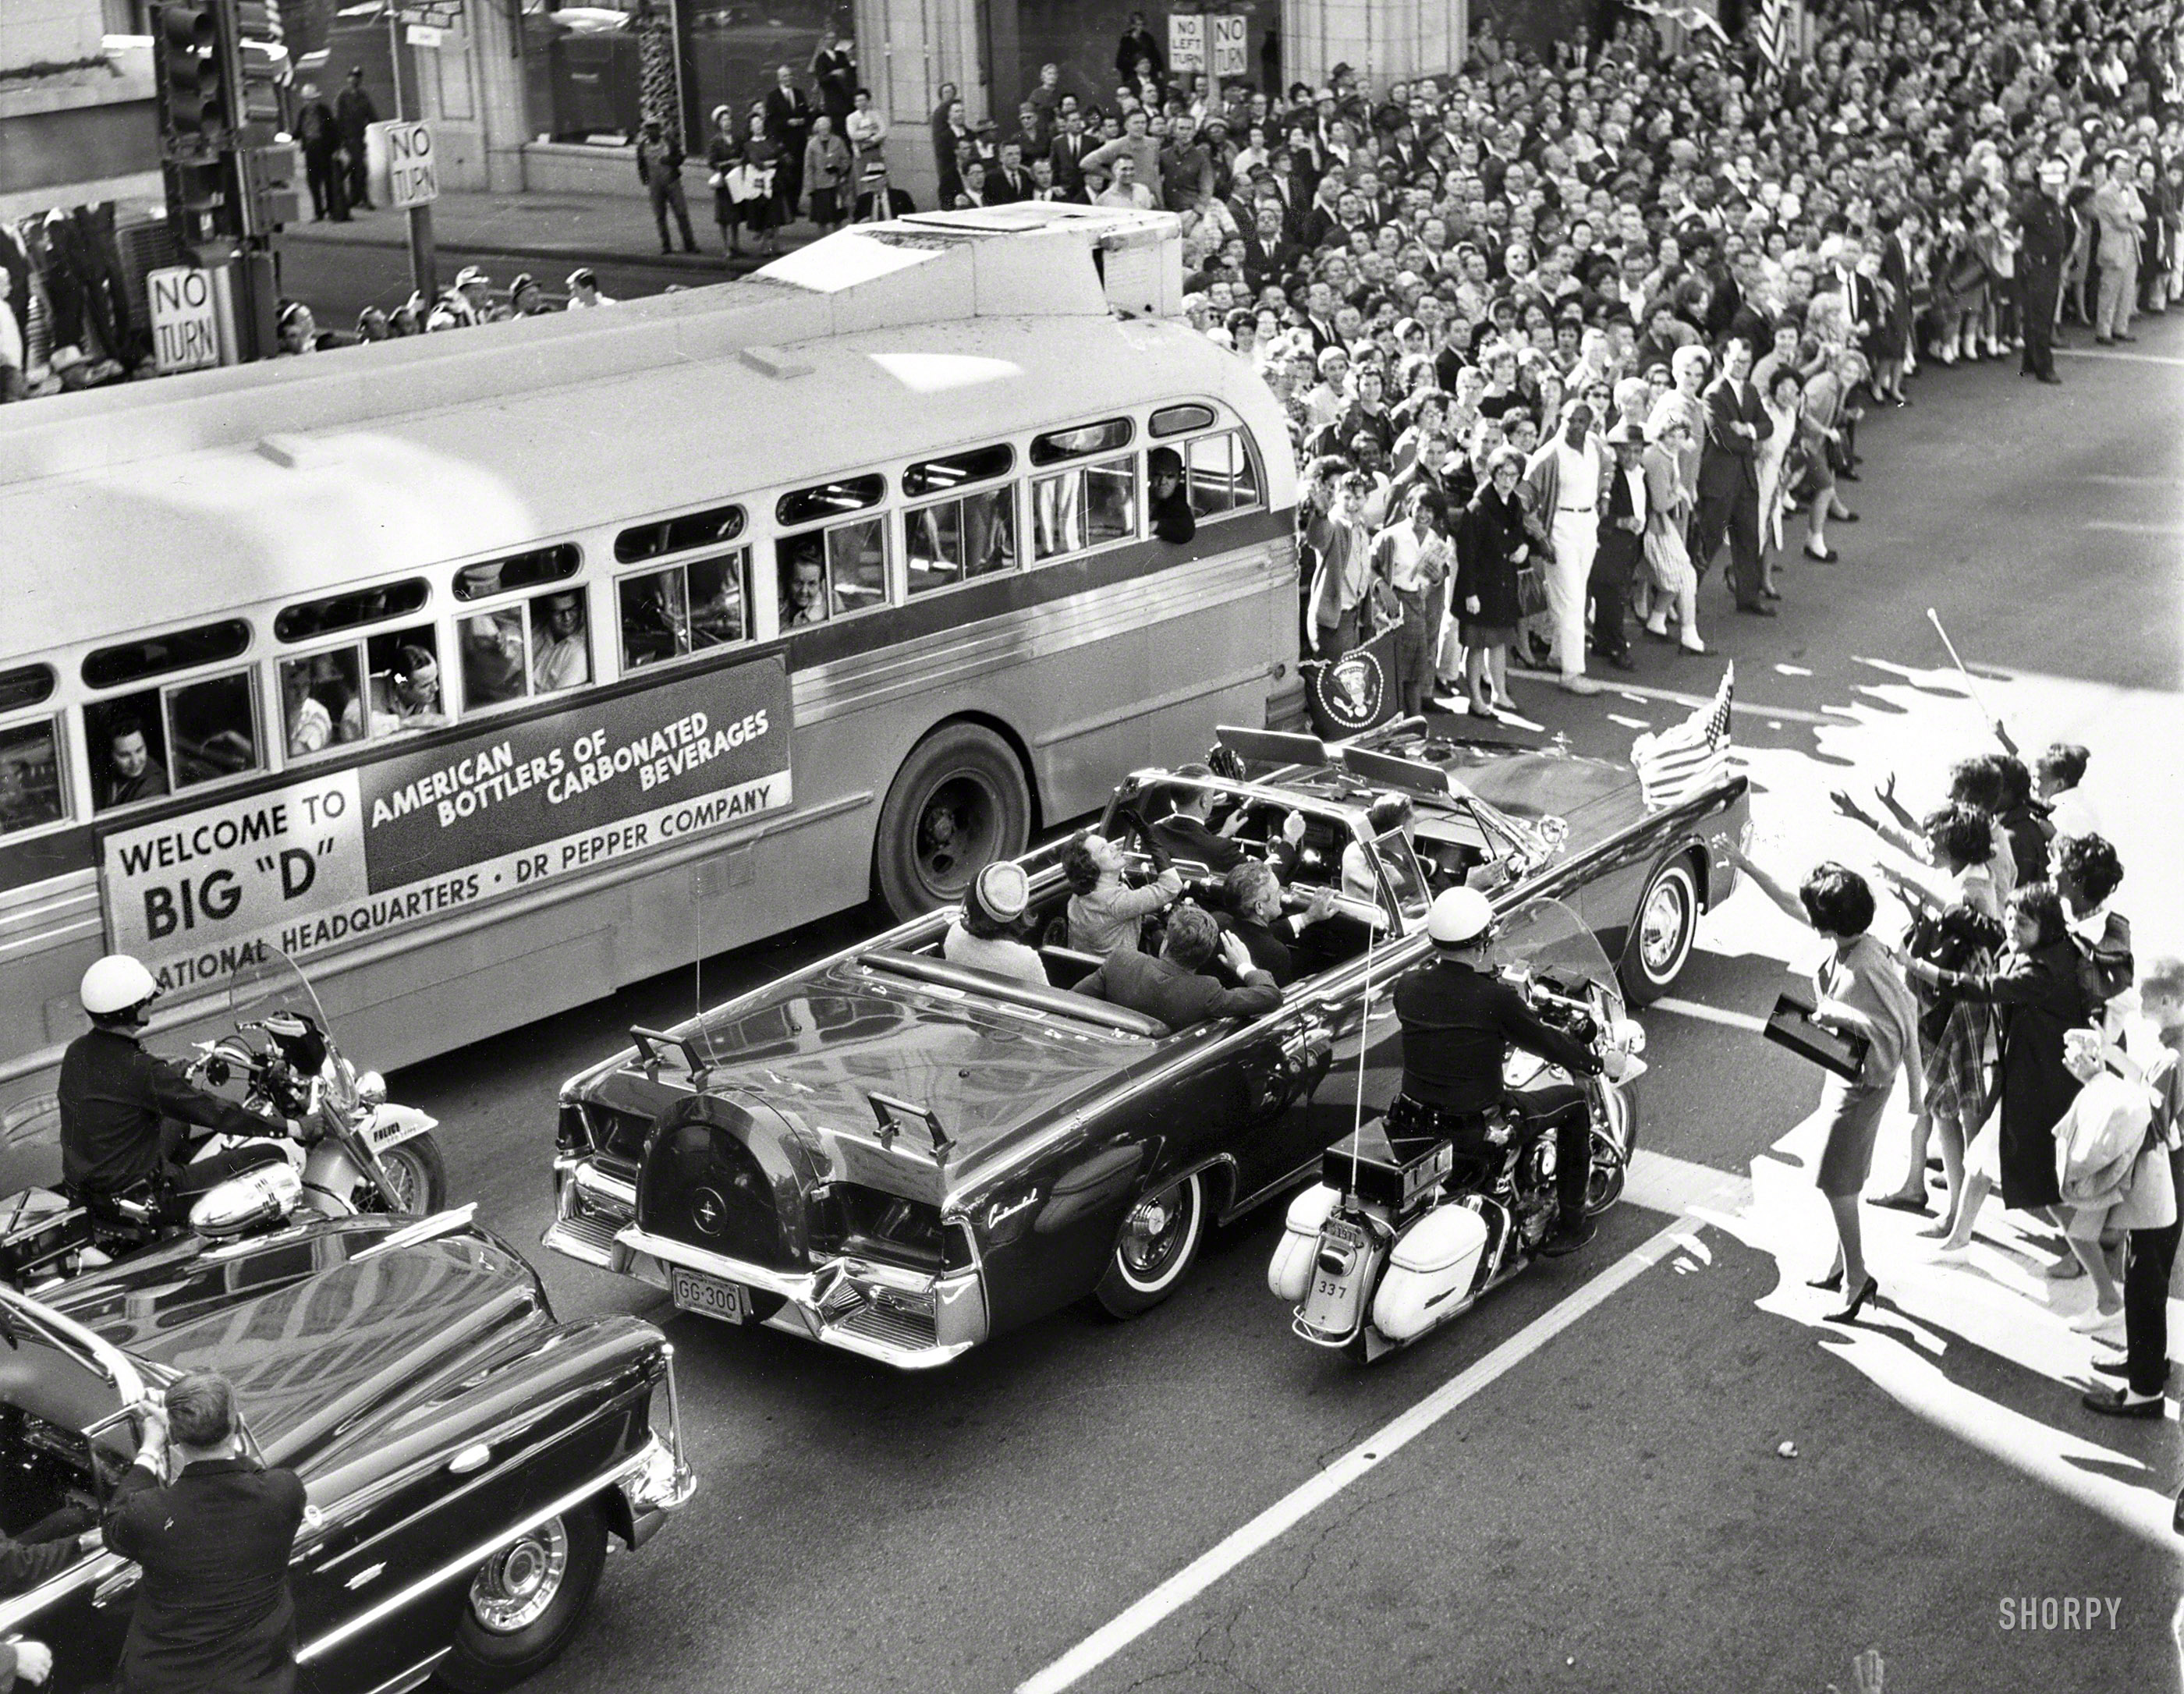 &nbsp; &nbsp; &nbsp; &nbsp; President Kennedy on that dark yet sunny day in Dallas 50 years ago, minutes before he was assassinated.
November 22, 1963. "Overview of crowds of people waving as President John F. Kennedy and his wife sit in back of limousine during procession through downtown Dallas, Texas; Texas Governor John Connally and his wife ride in the limousine's jump seats." New York World-Telegram and the Sun Newspaper Photograph Collection, Library of Congress. View full size.